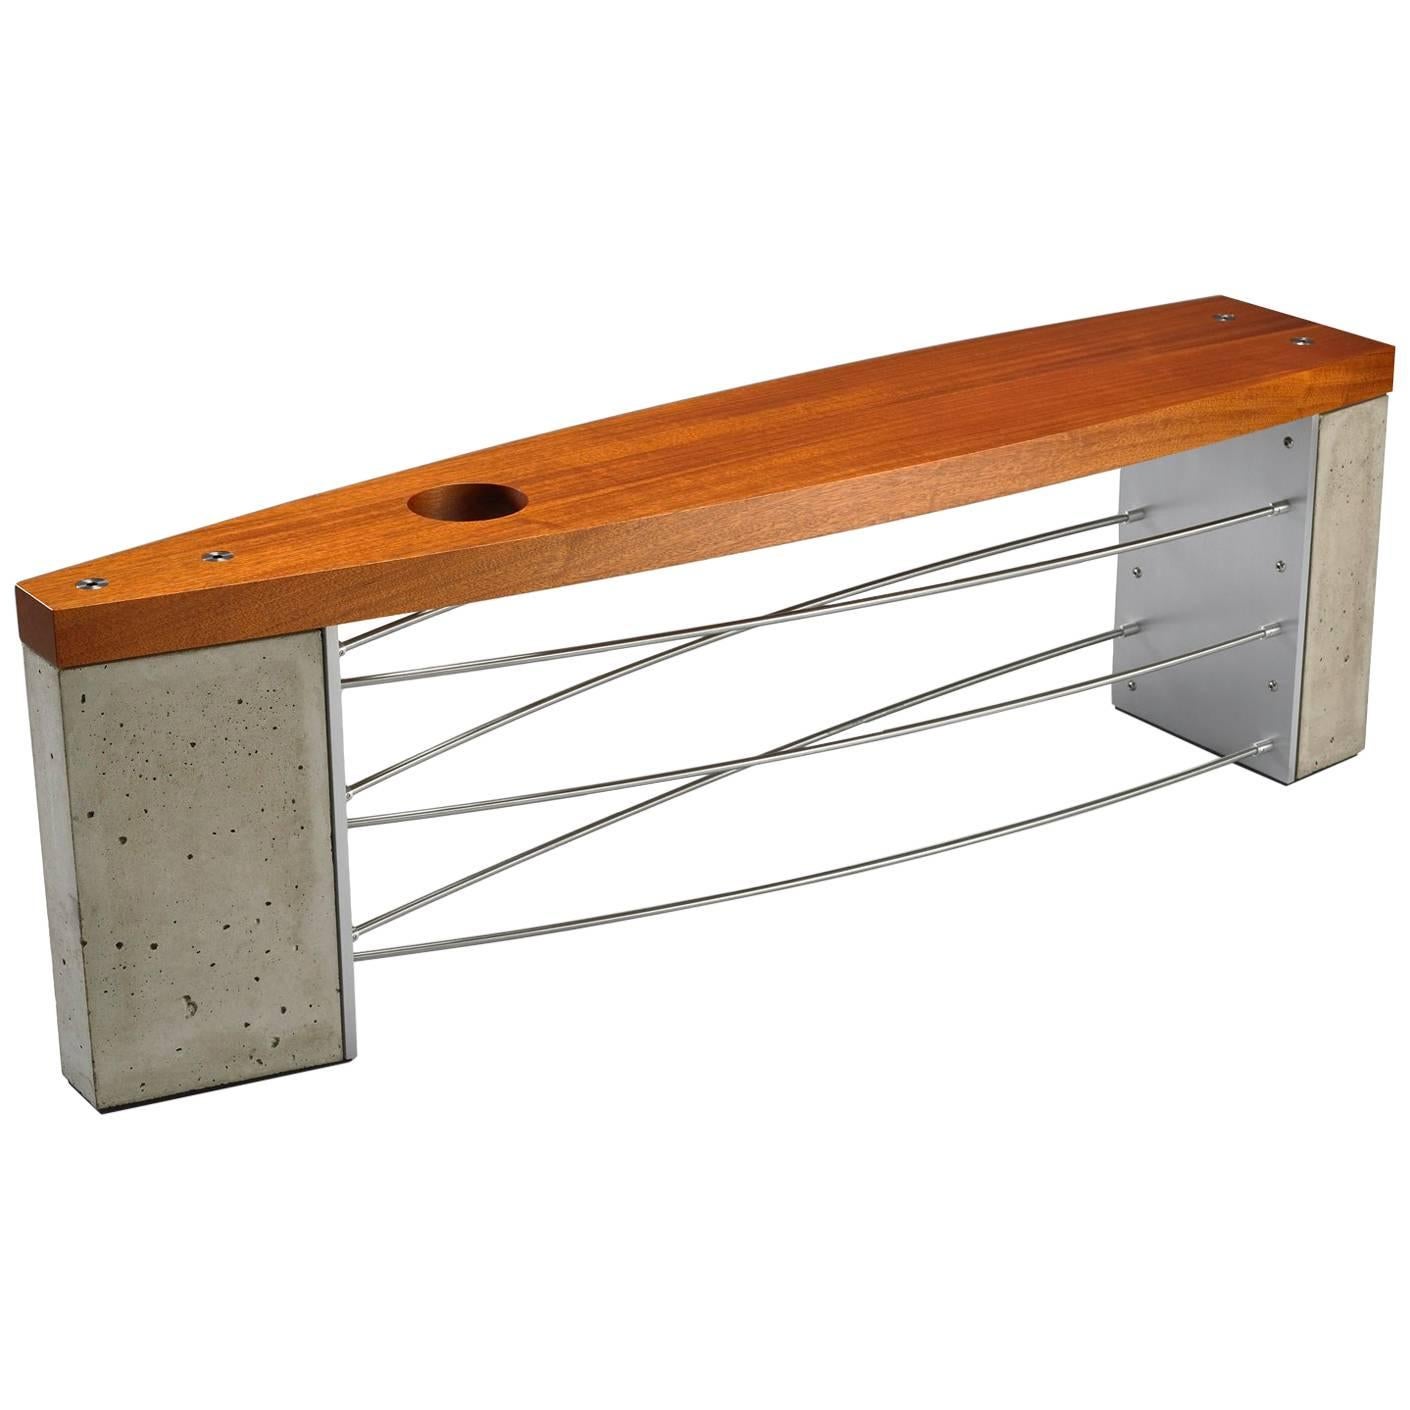 Modern Bench by Peter Harrison with Industrial Concrete Wood and Metal